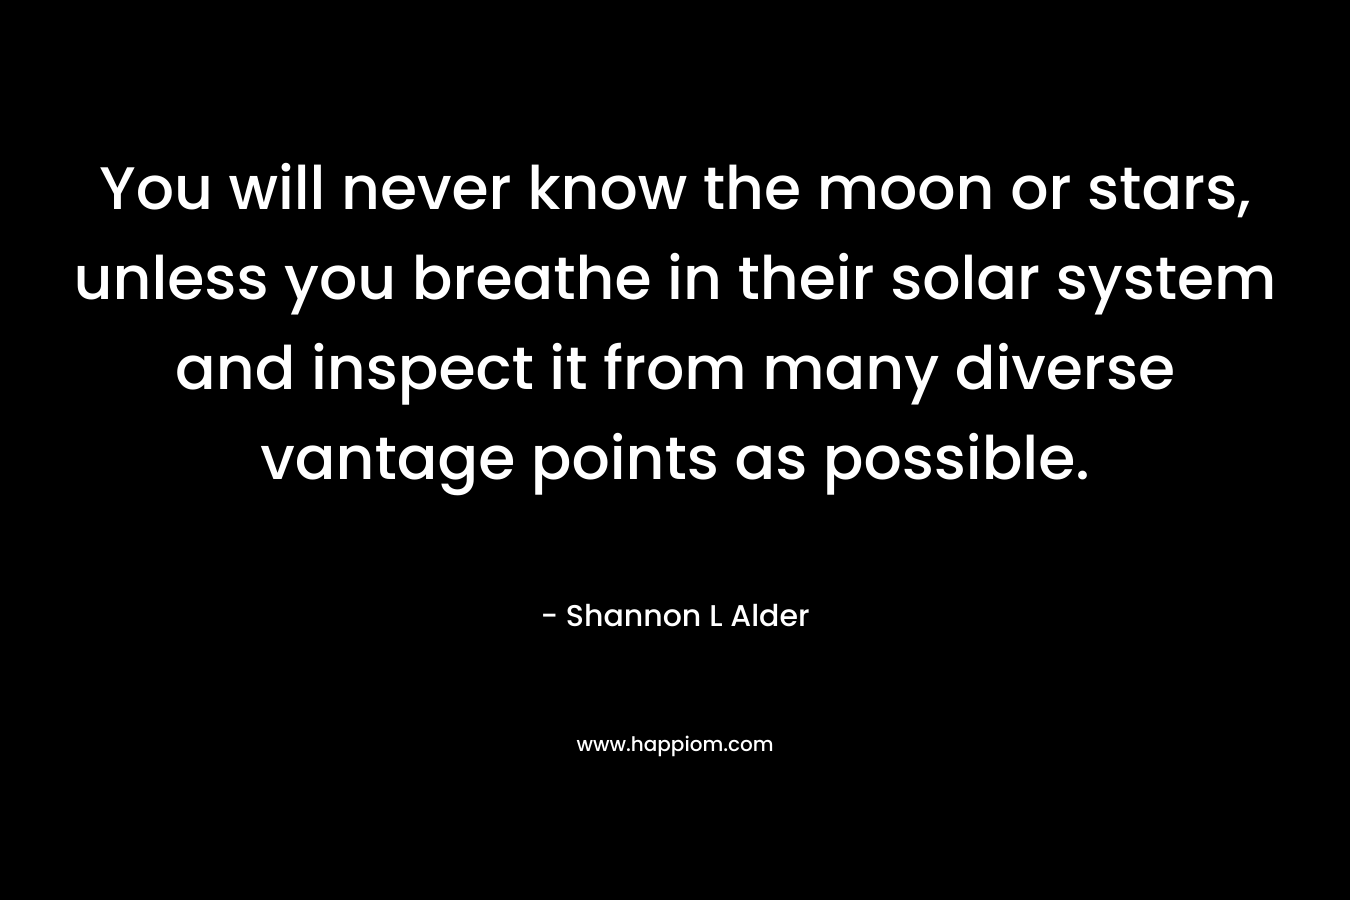 You will never know the moon or stars, unless you breathe in their solar system and inspect it from many diverse vantage points as possible.